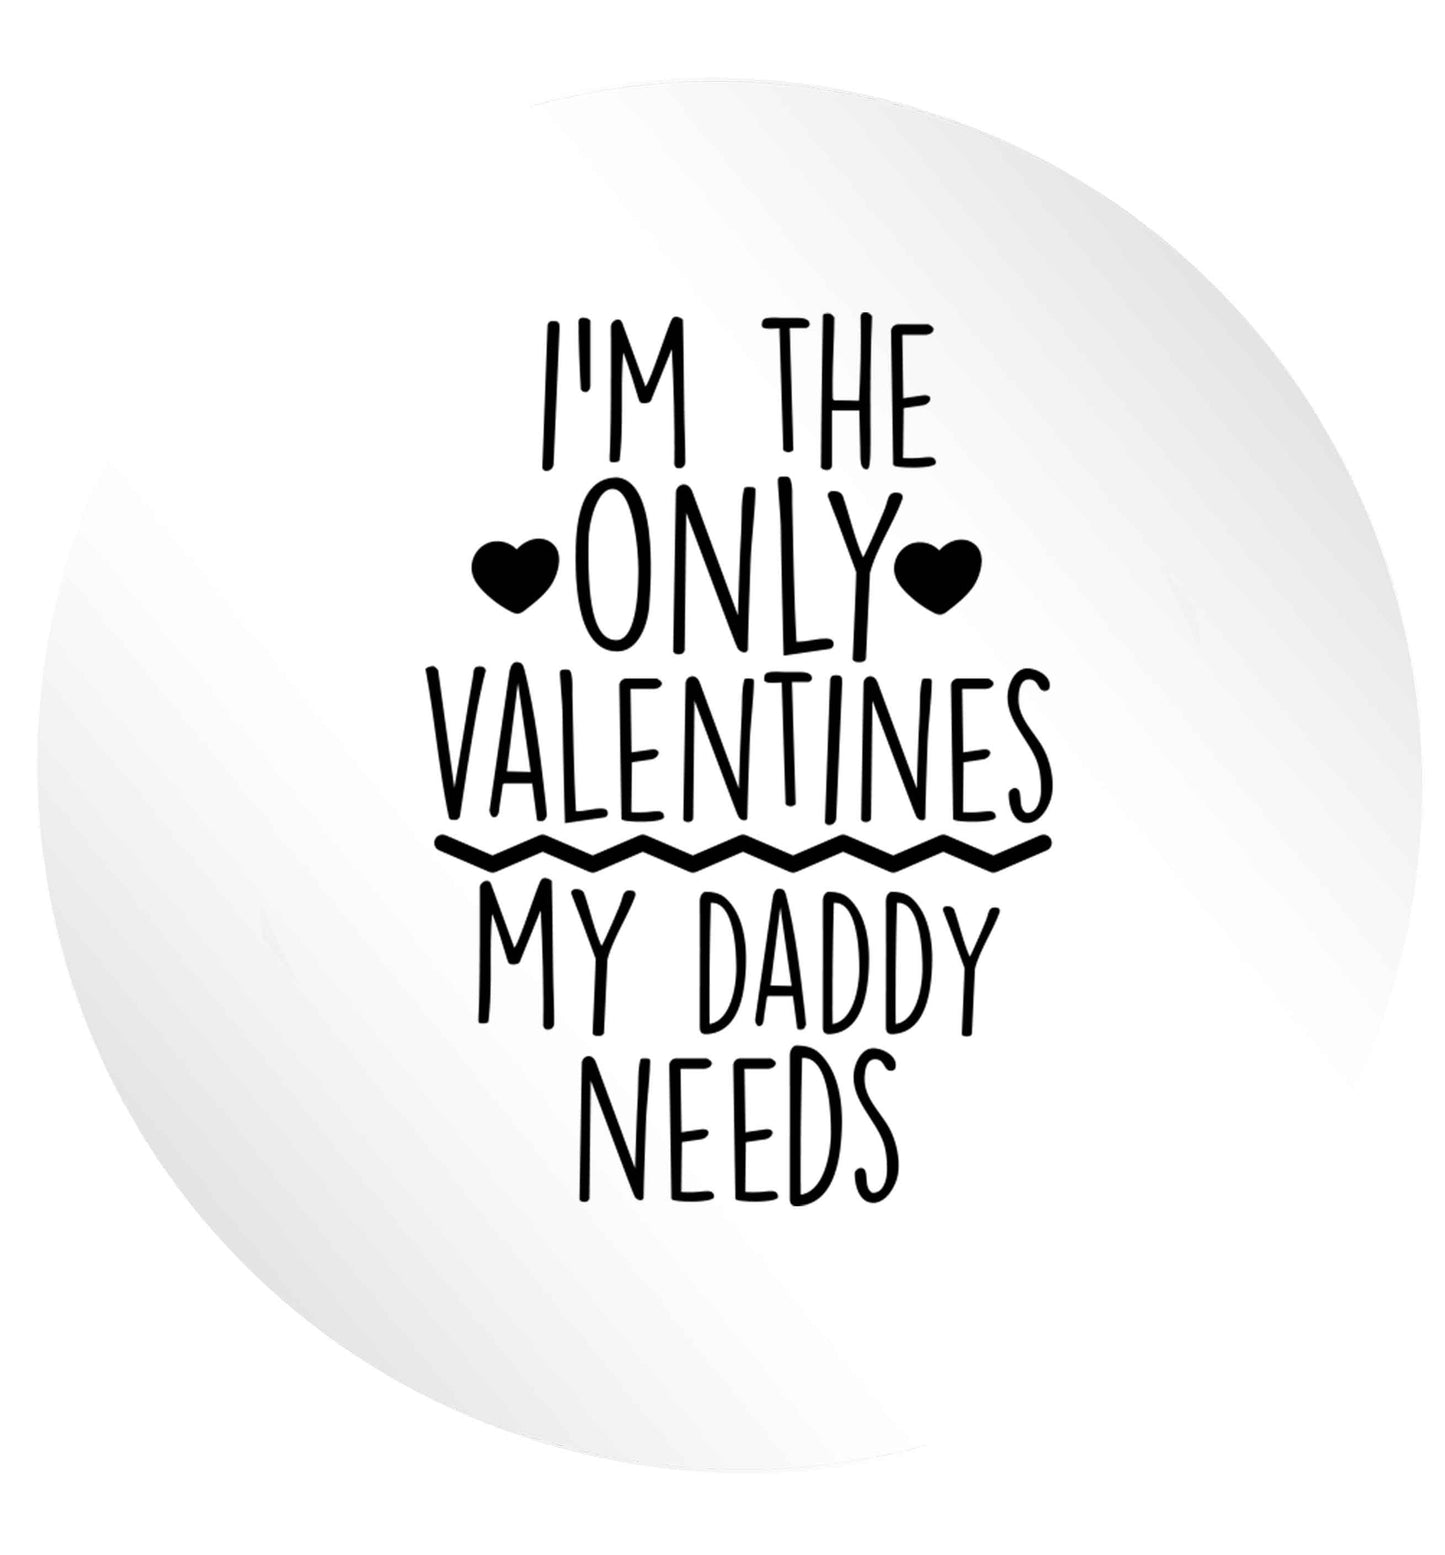 I'm the only valentines my daddy needs 24 @ 45mm matt circle stickers